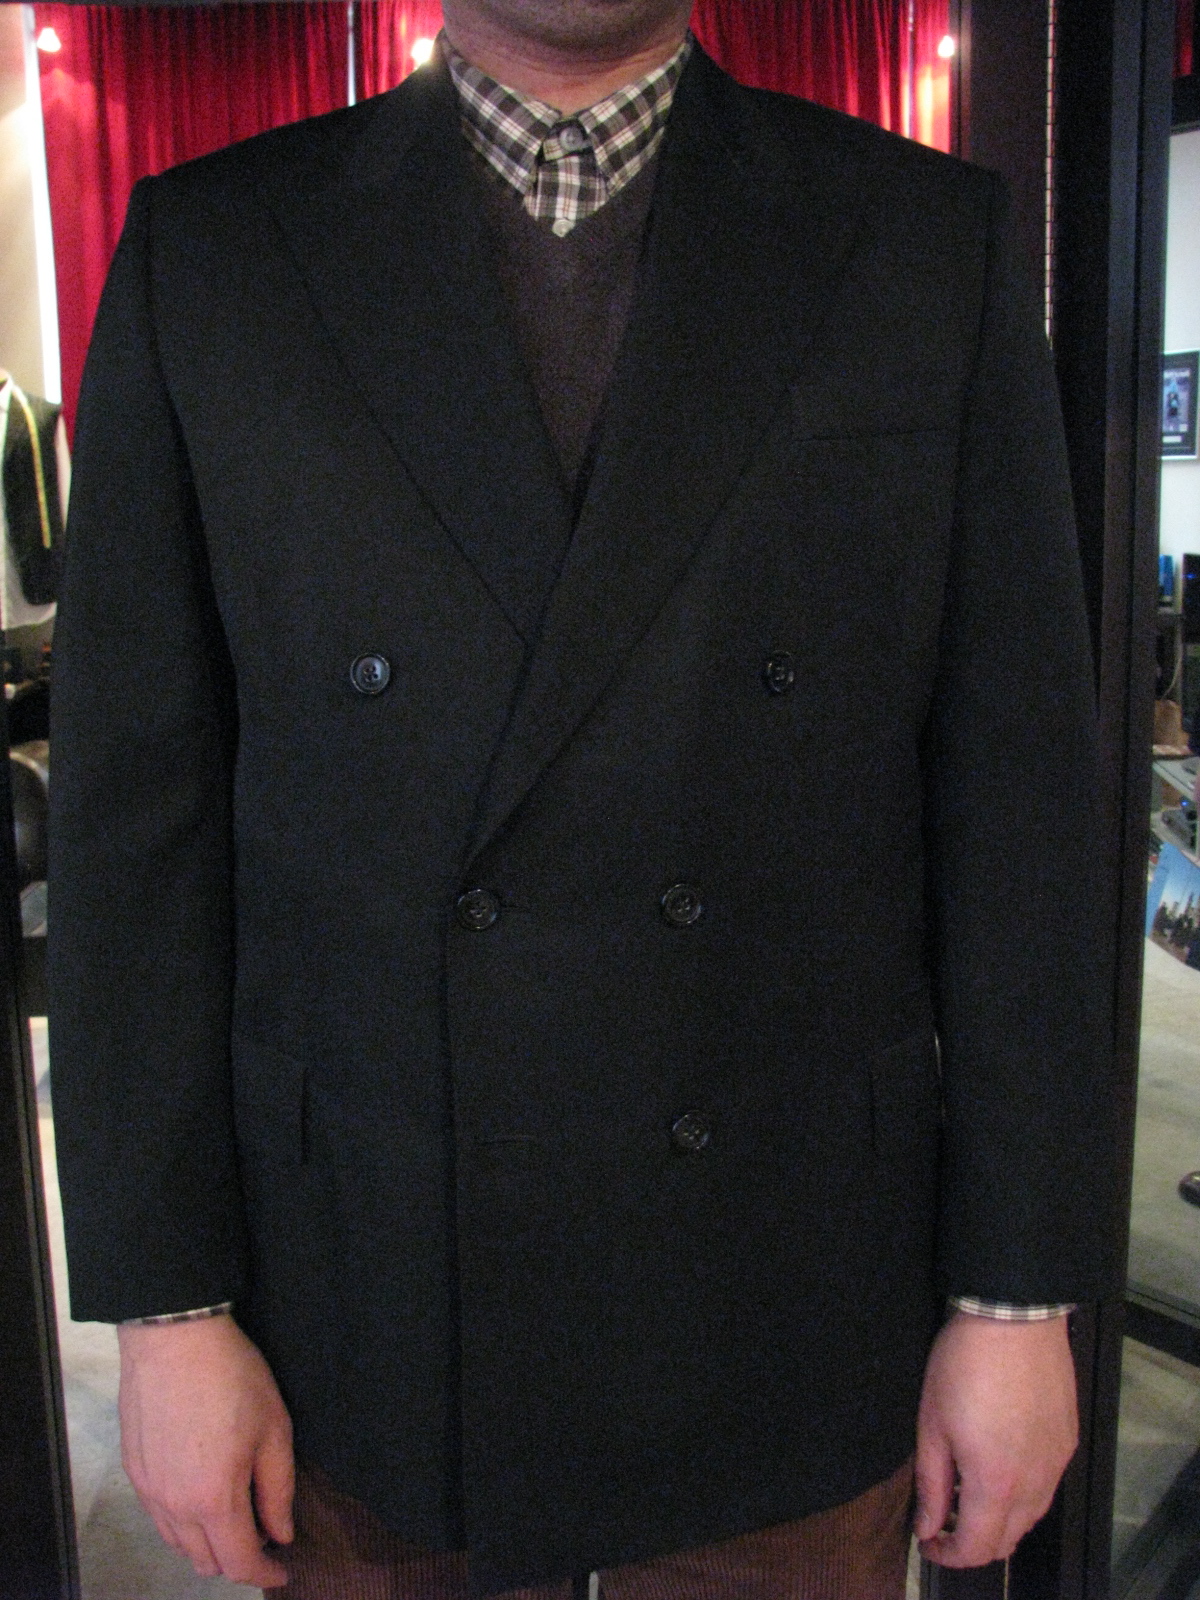 Man in dark double breasted custom made suit jacket